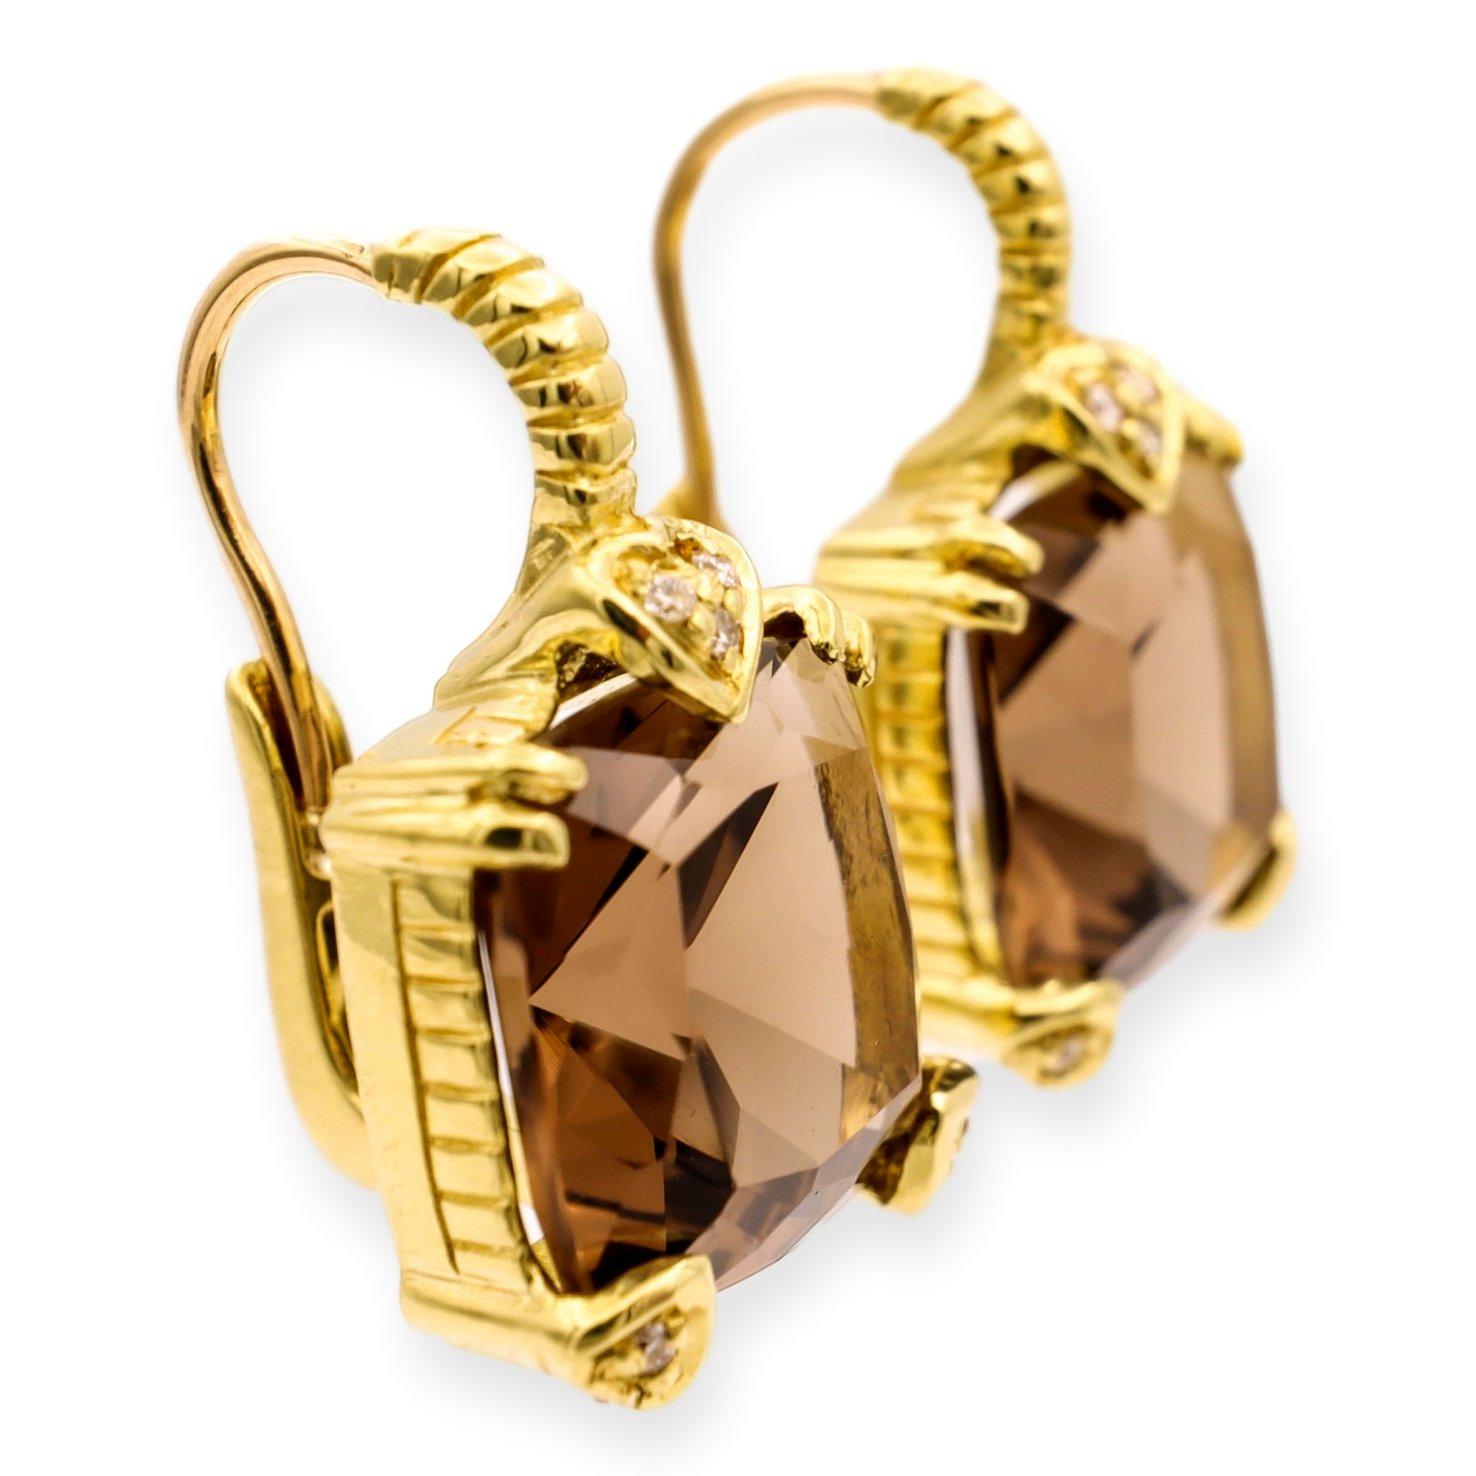 Judith Ripka Vintage Lever-Back style earrings are a classic and elegant choice. The earrings are finely crafted in 18 karat yellow gold. The earrings are adorned with 2 stunning cushion-shaped brown smokey quartz stones. The gemstone is held